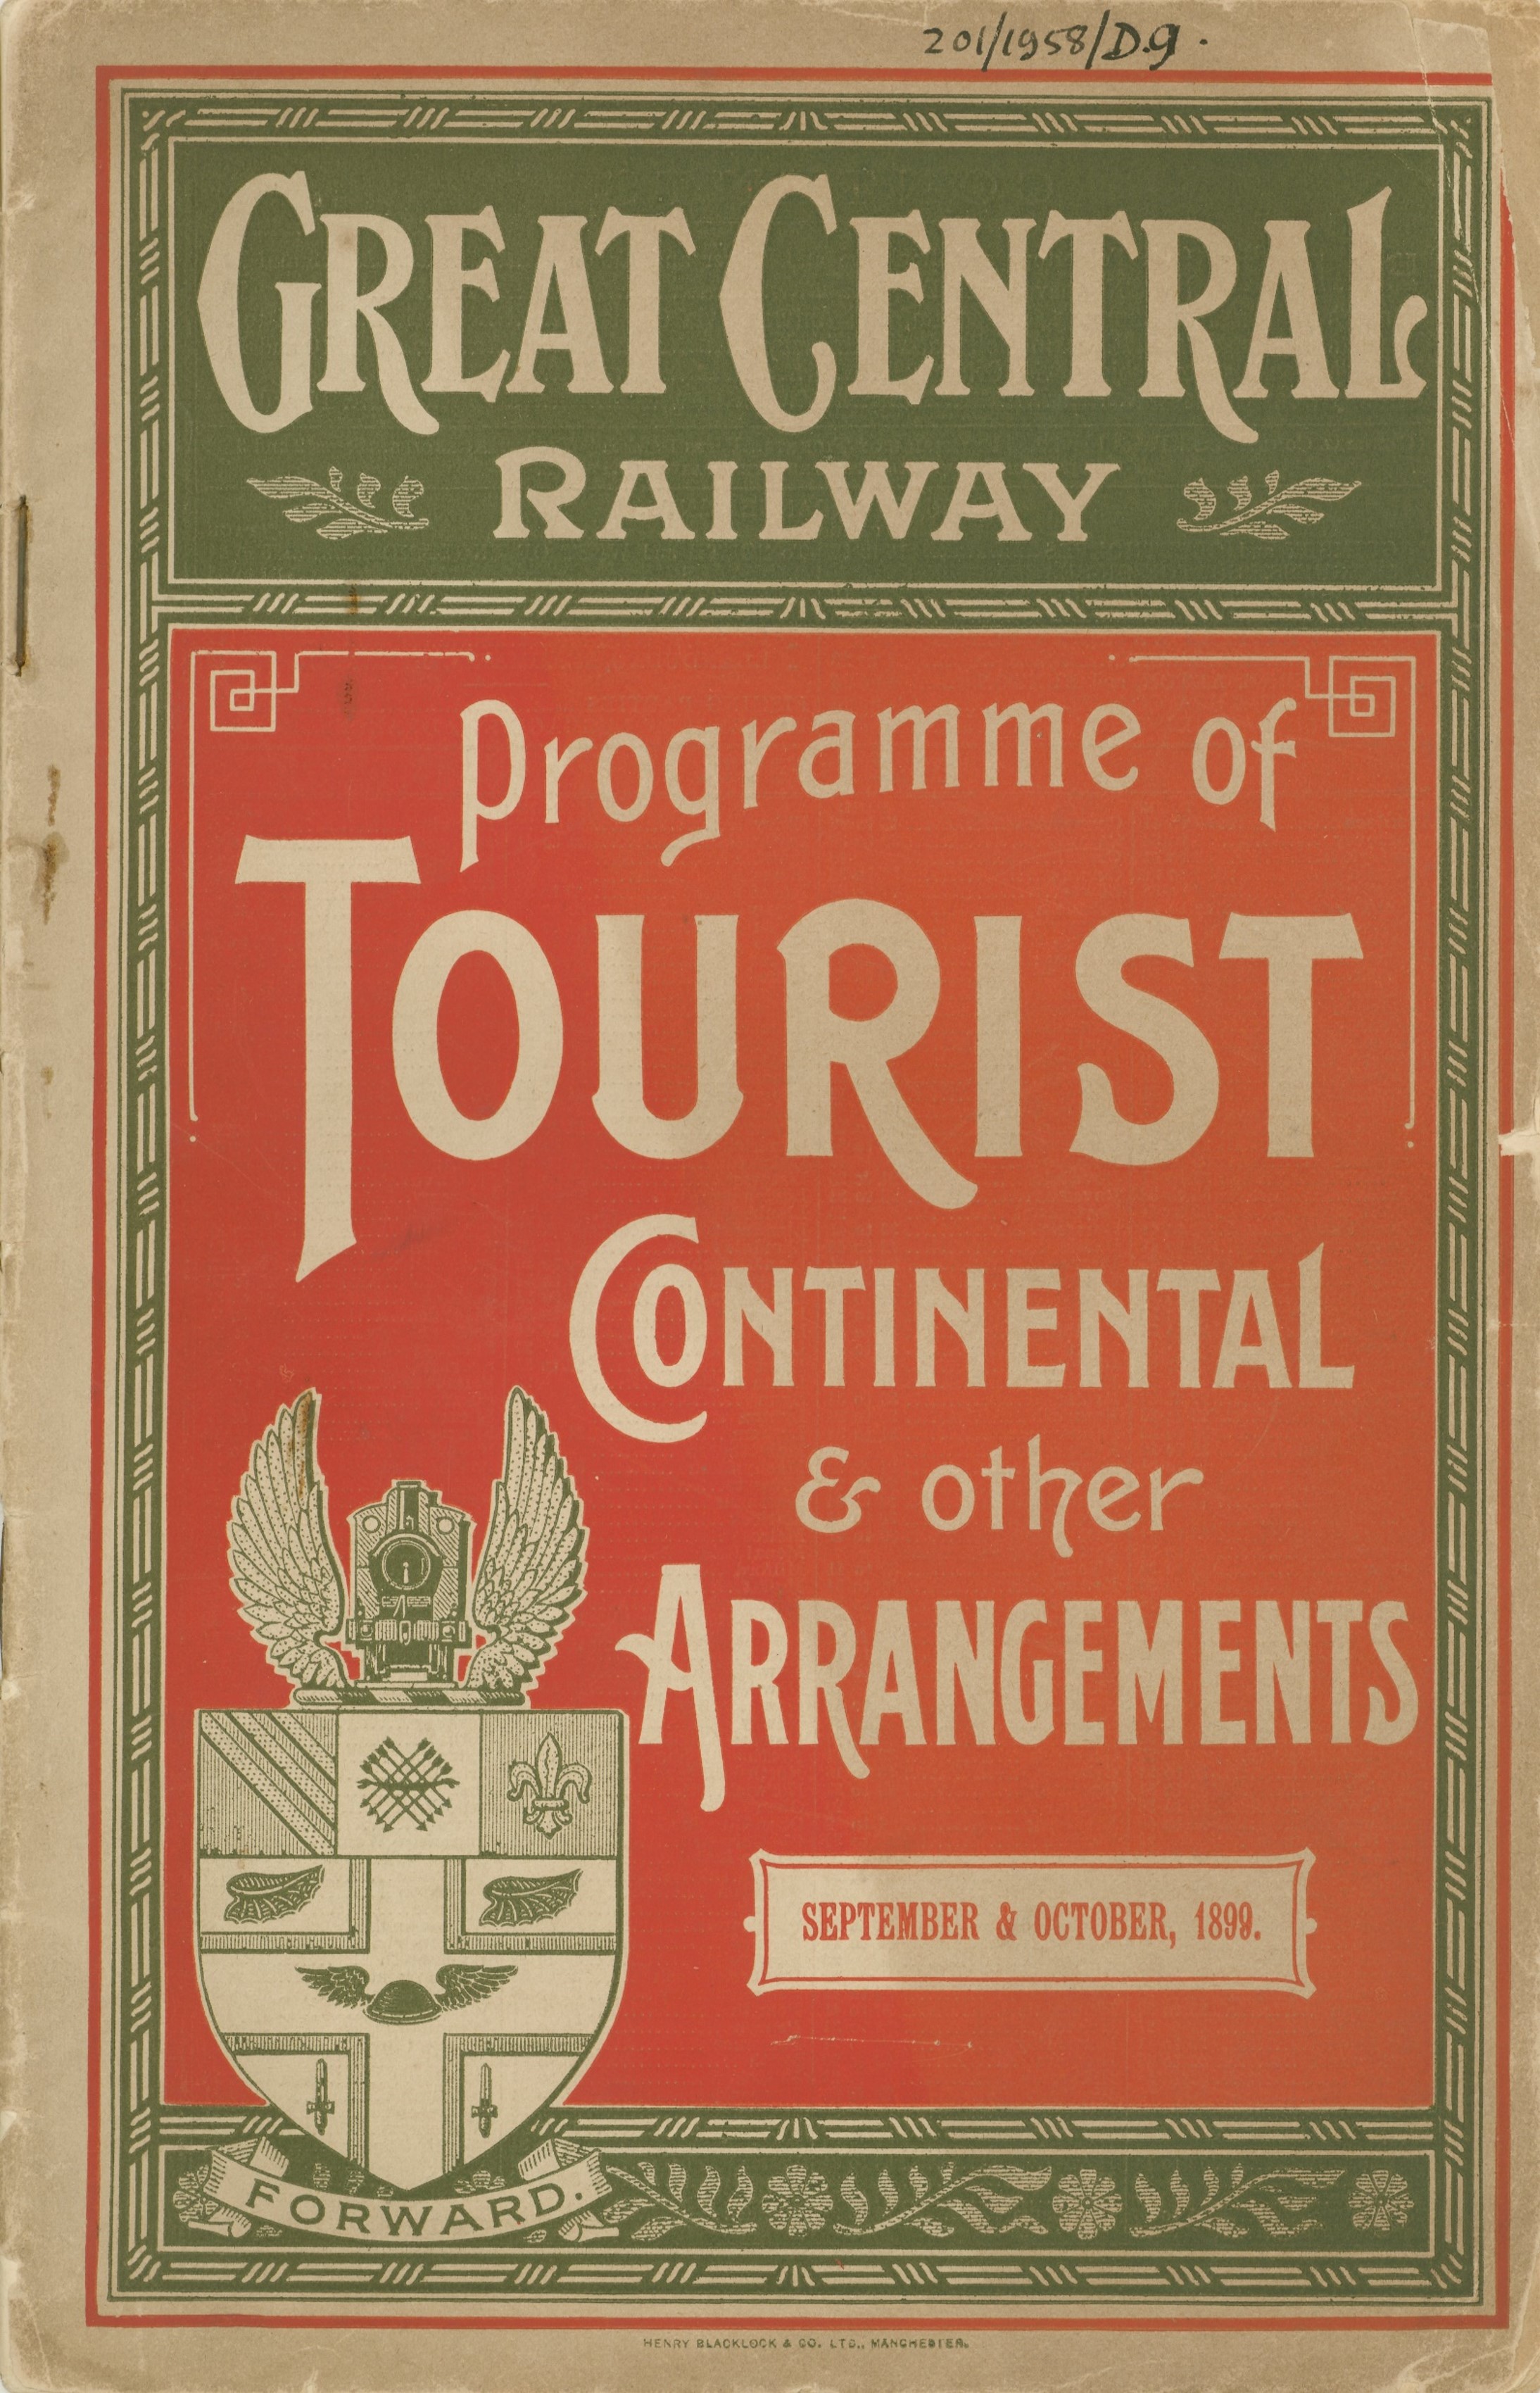 Great Central Railway Tourist Programme - Leicester & Leicestershire Record Office